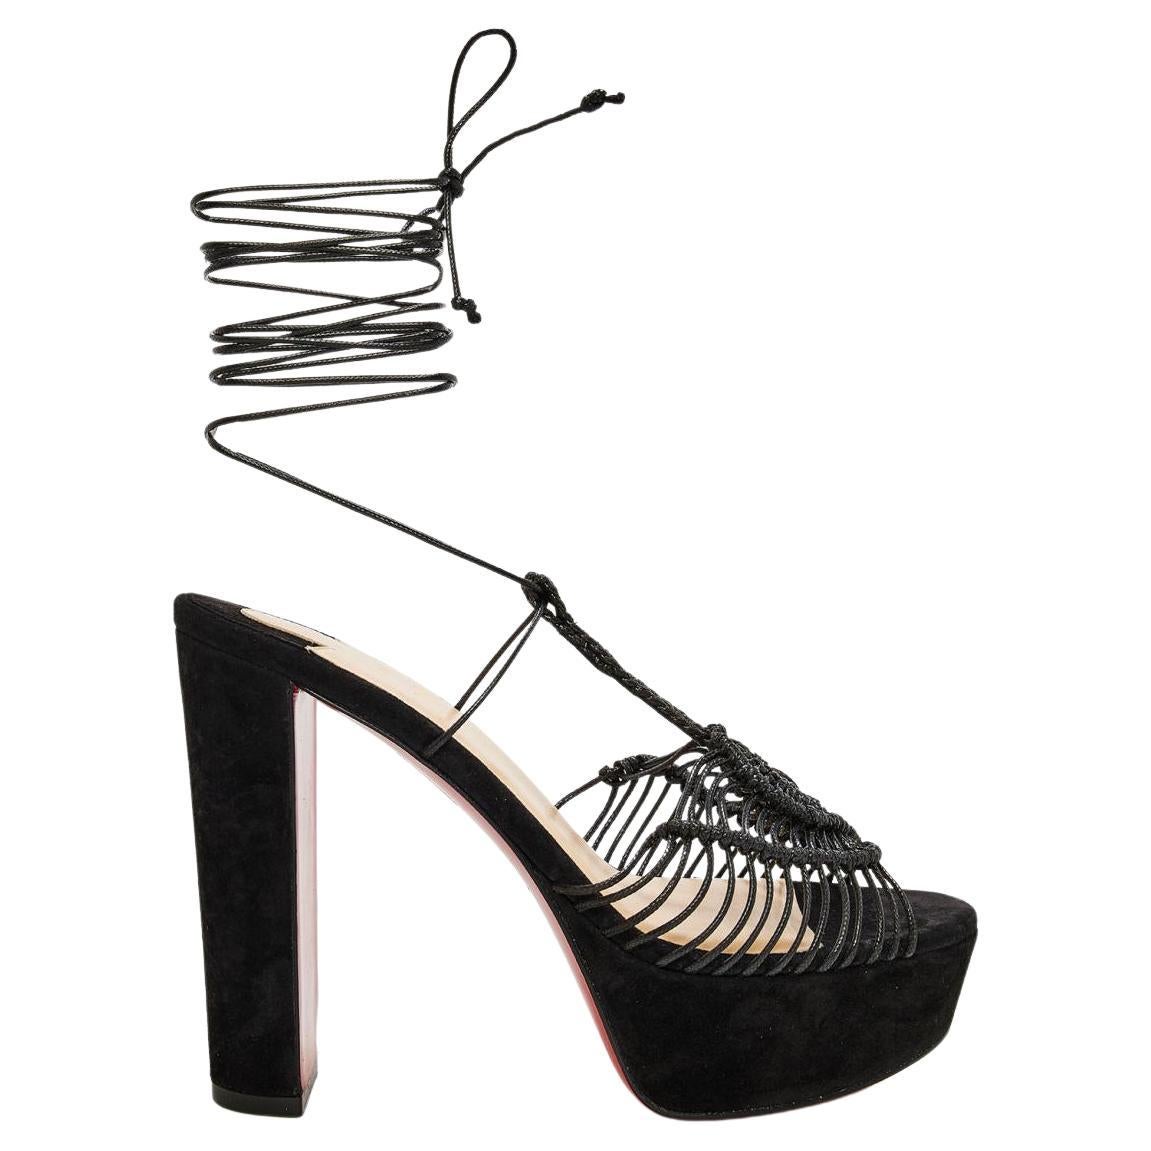 Christian Louboutin Janis In Heels Alta 130 Sandals Sz 36 For Sale